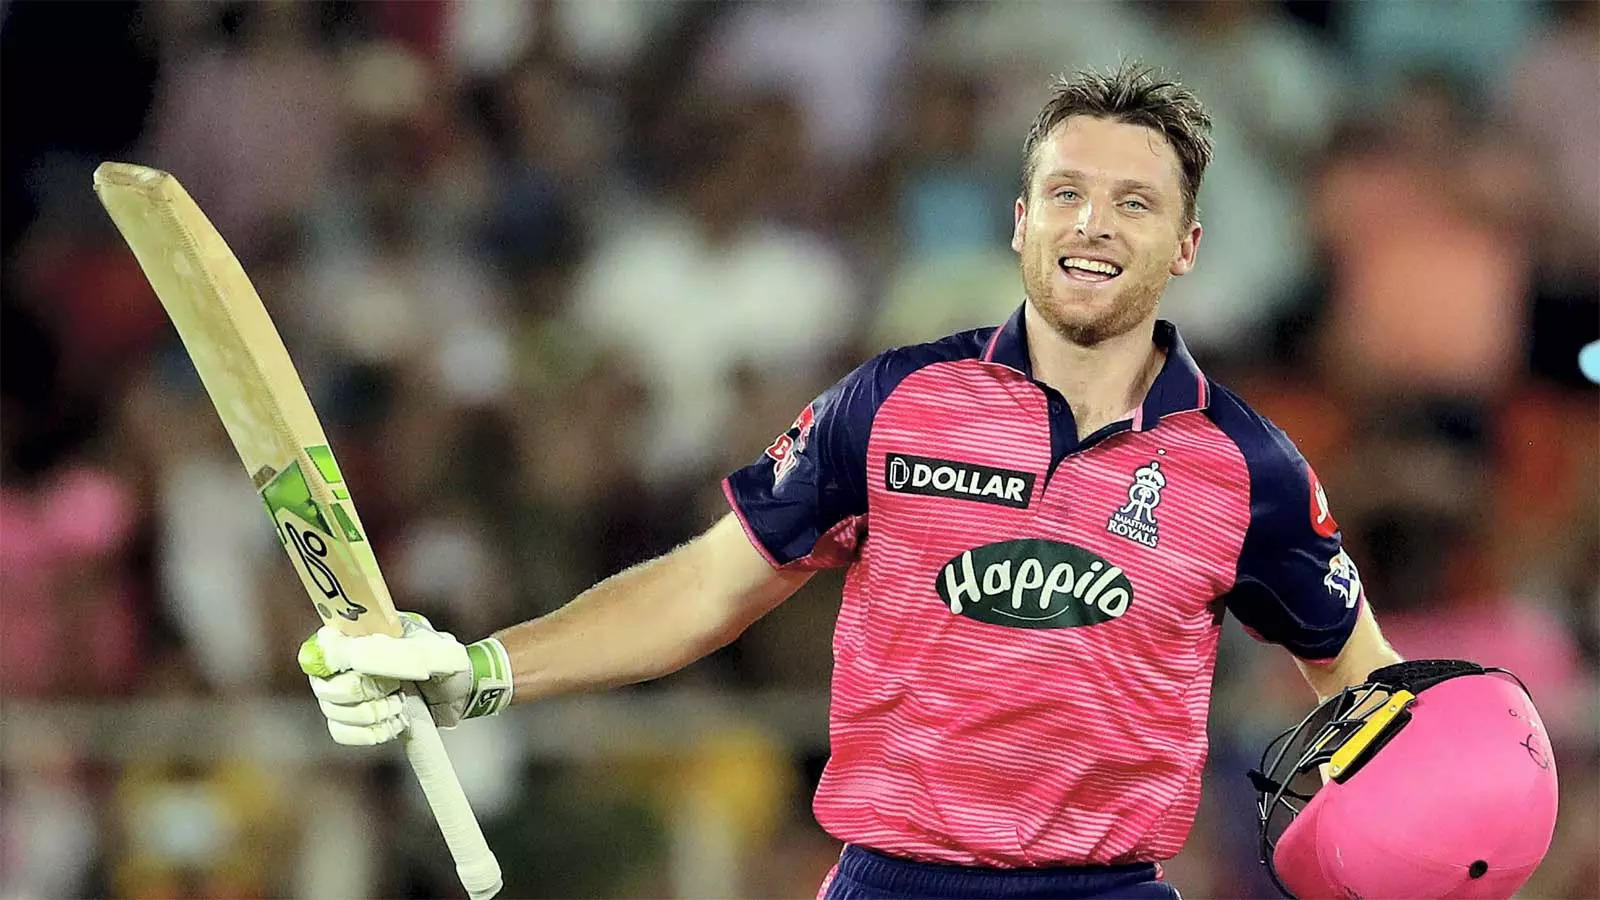 Jos Buttler recorded his 4th ton of IPL 2022 season in Qualifier 2